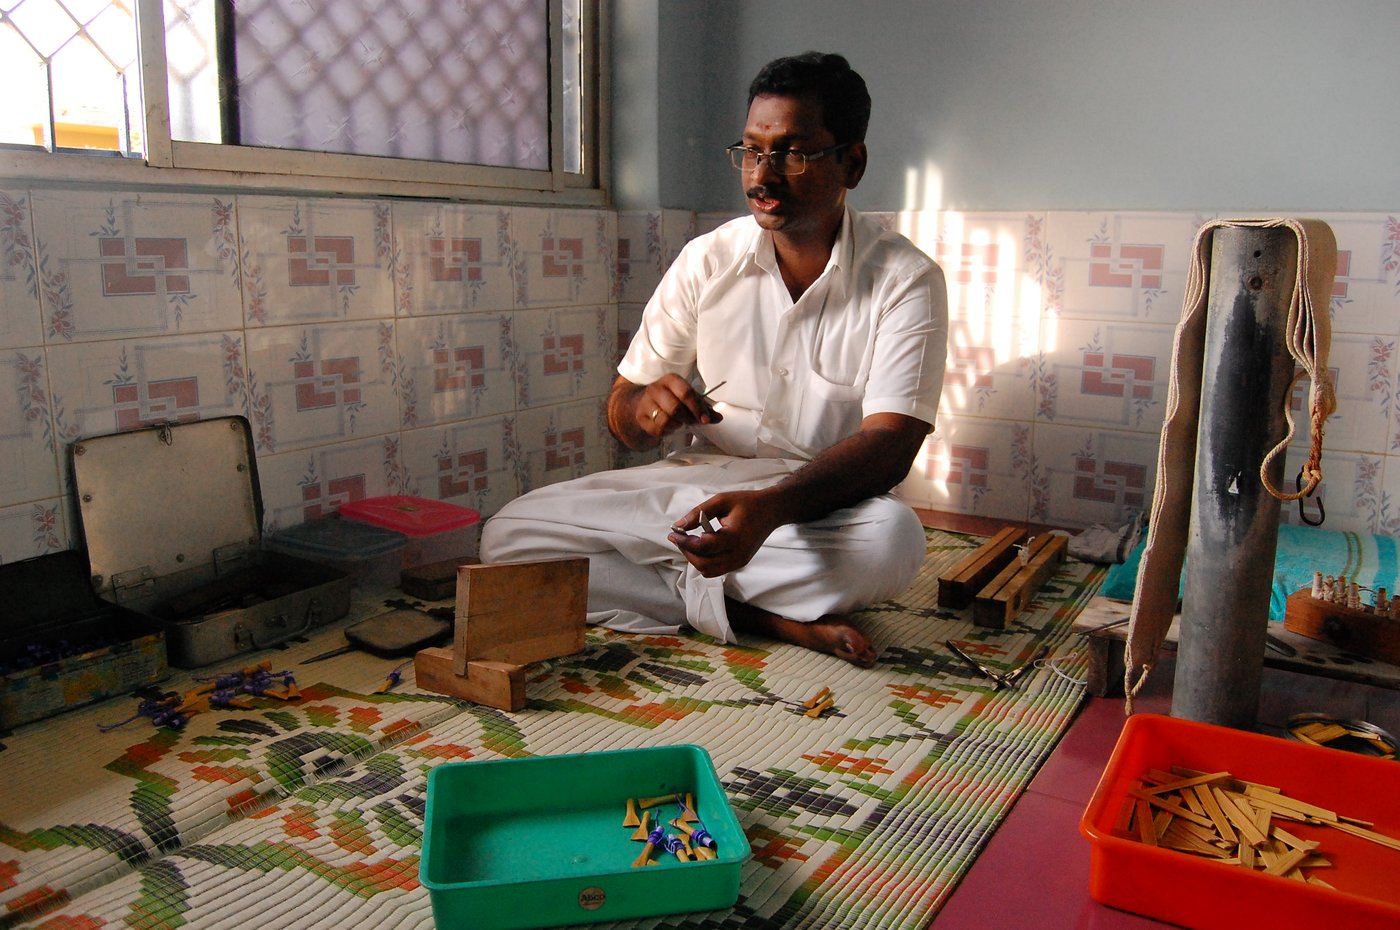 Man making Seevali, a handmade reed mouth-piece to play the Nadaswaram